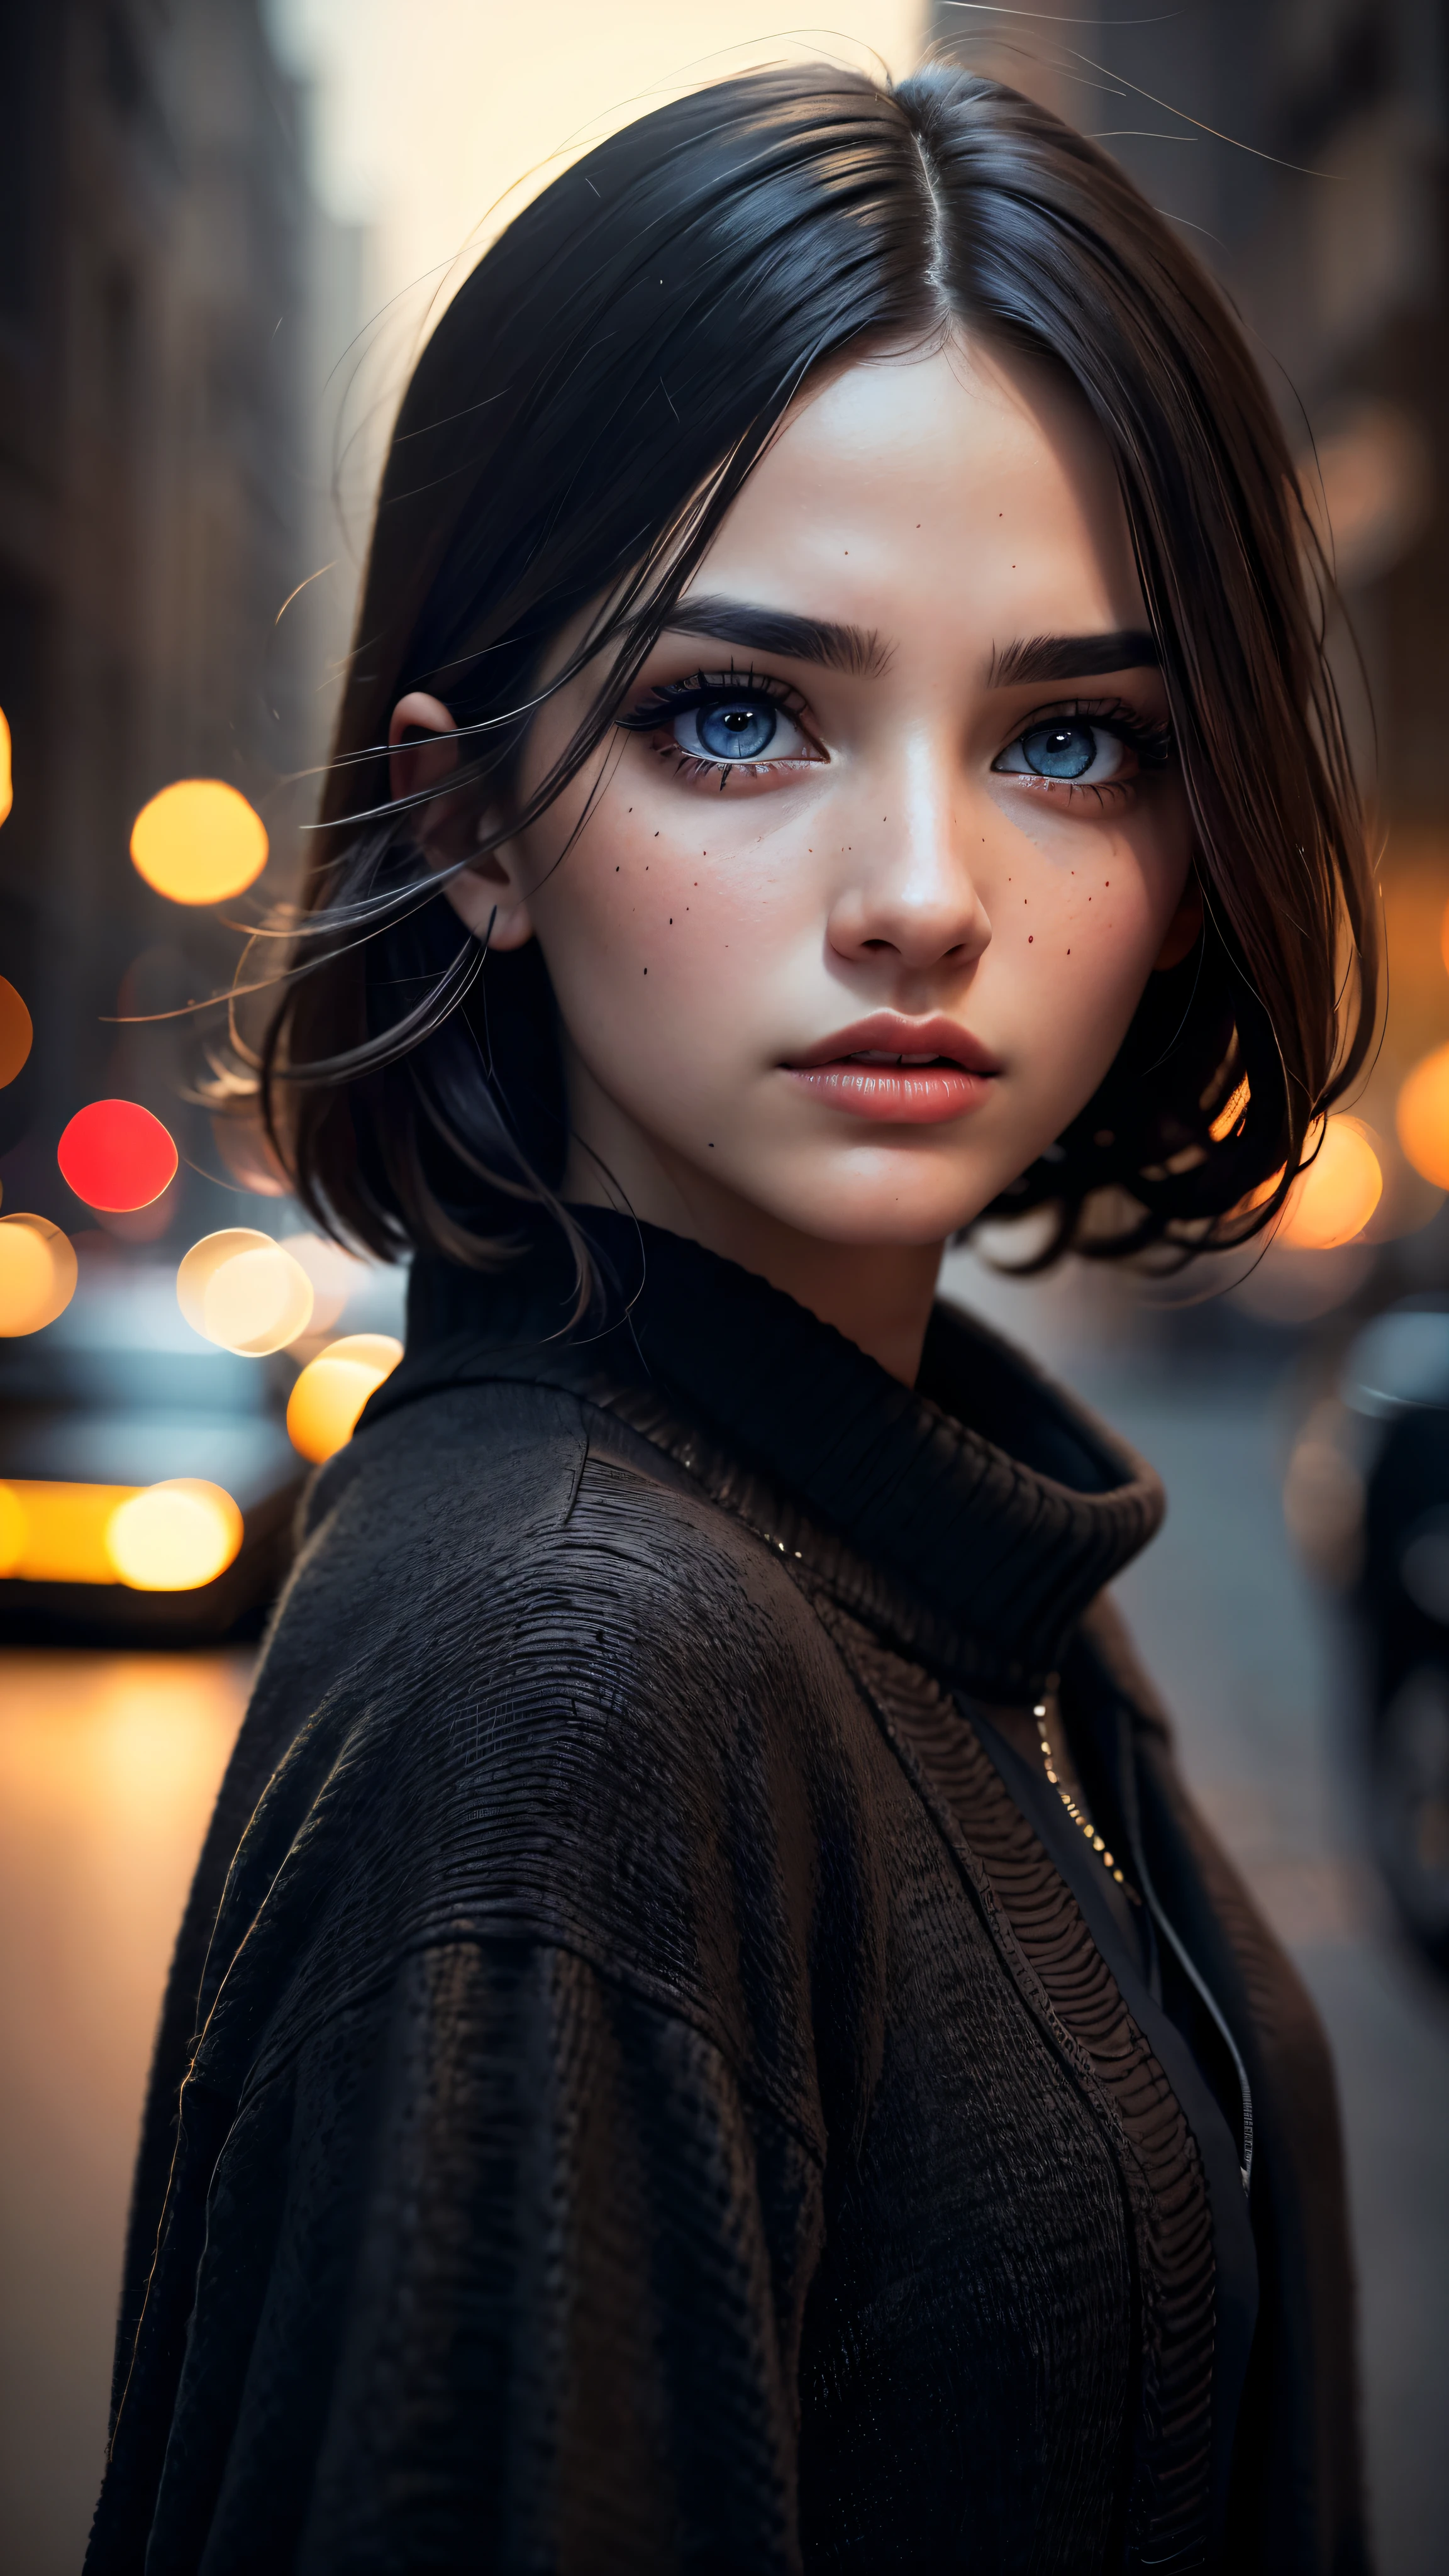 beautiful detailed eyes, beautiful detailed lips, extremely detailed eyes and face,long eyelashes, realism, high resolution, vibrant colors, urban setting, street view, nighttime scene, atmospheric lighting, moody ambiance, shadows and highlights, confident pose, serious expression, dynamic composition, cinematic style.